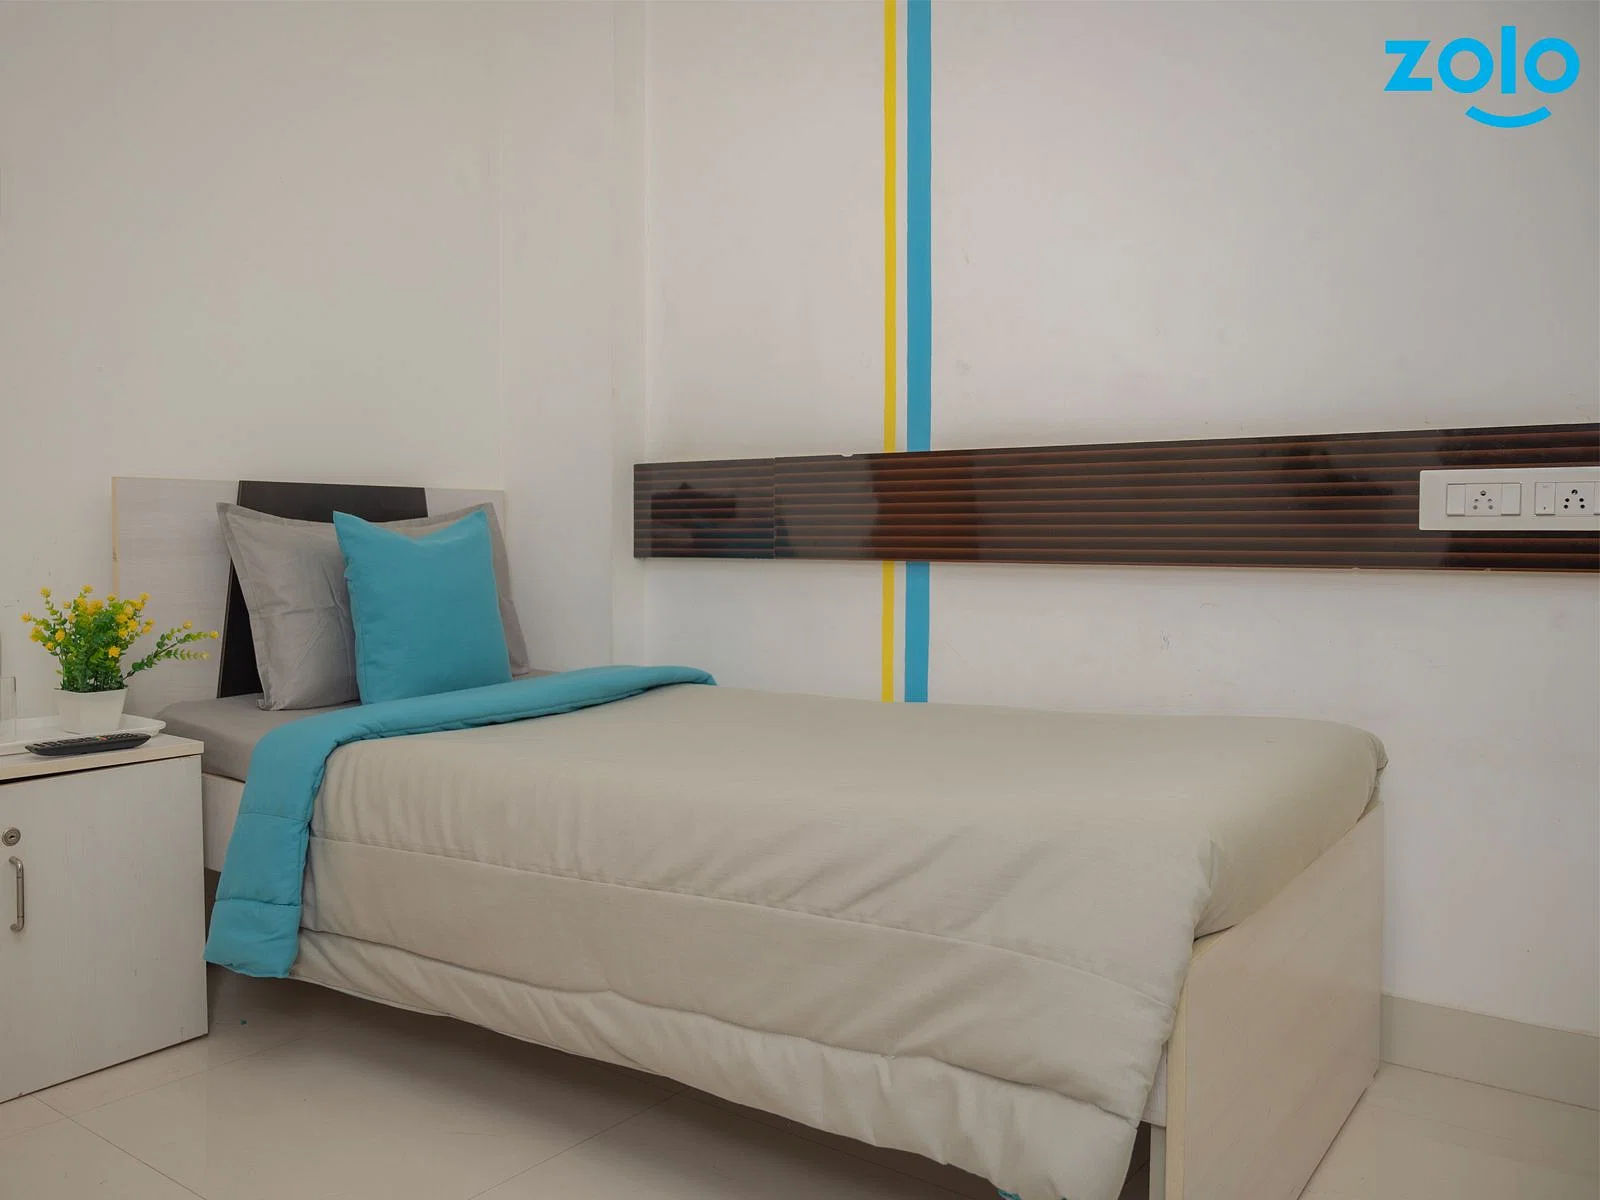 budget-friendly PGs and hostels for unisex with single rooms with daily hopusekeeping-Zolo Hazel